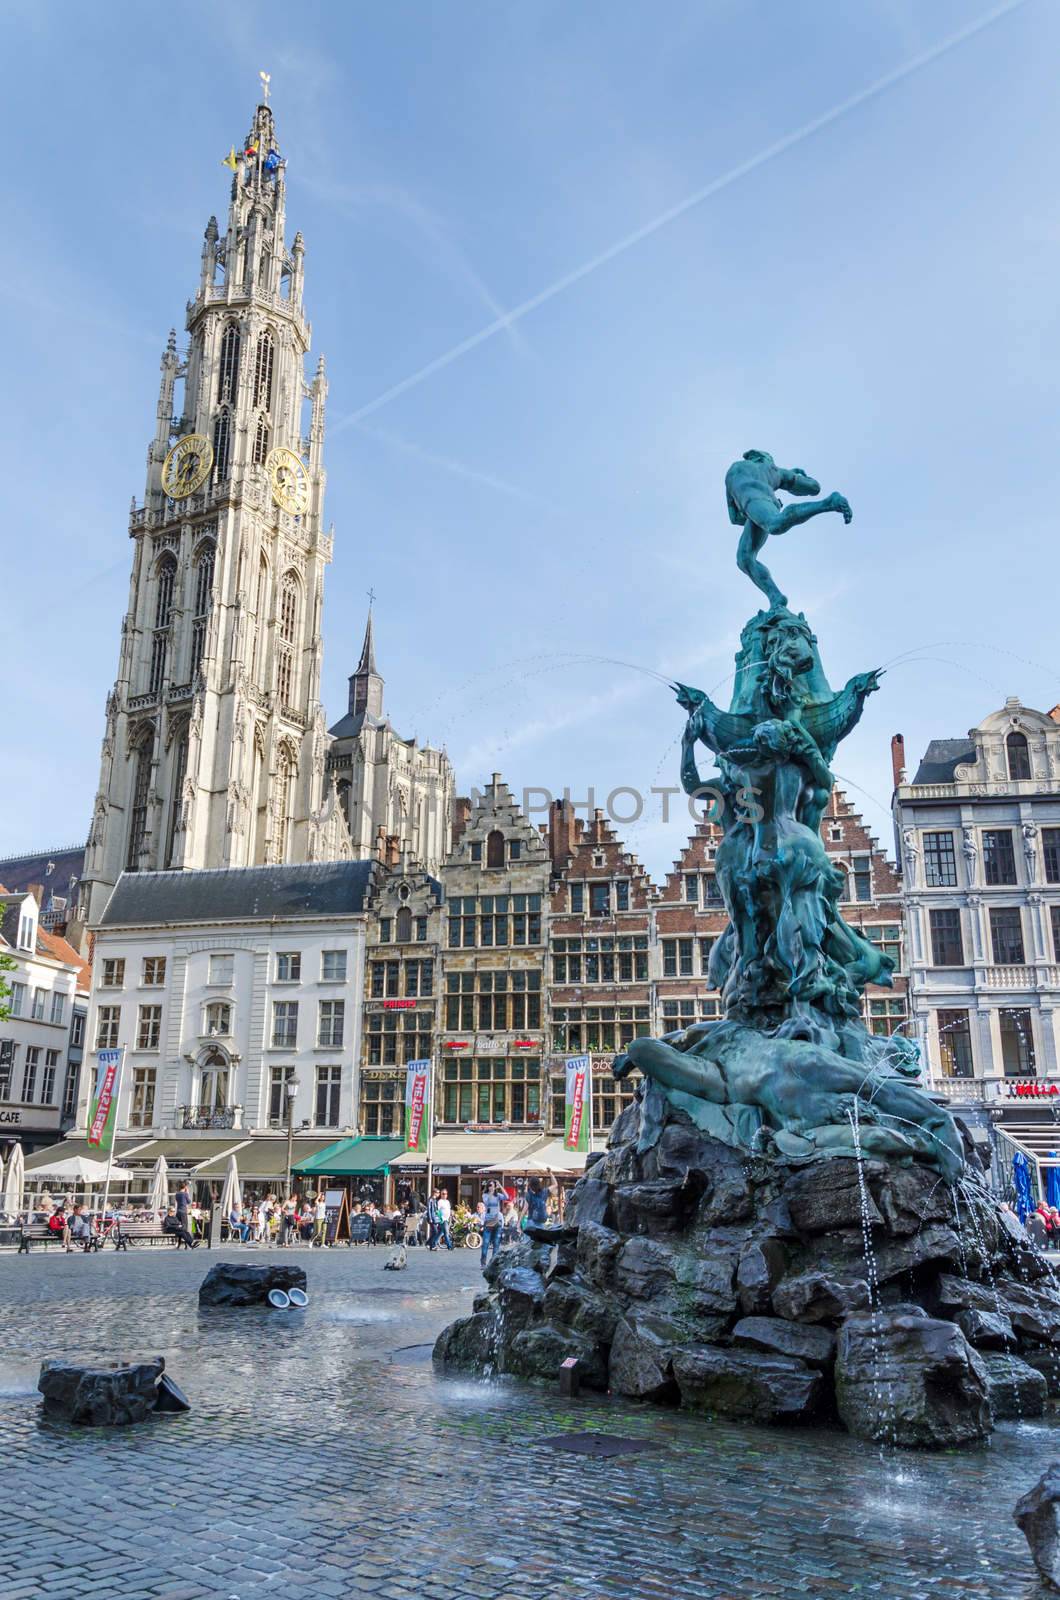 Antwerp, Belgium - May 10, 2015: Tourist visit The Grand Place with the Statue of Brabo by siraanamwong